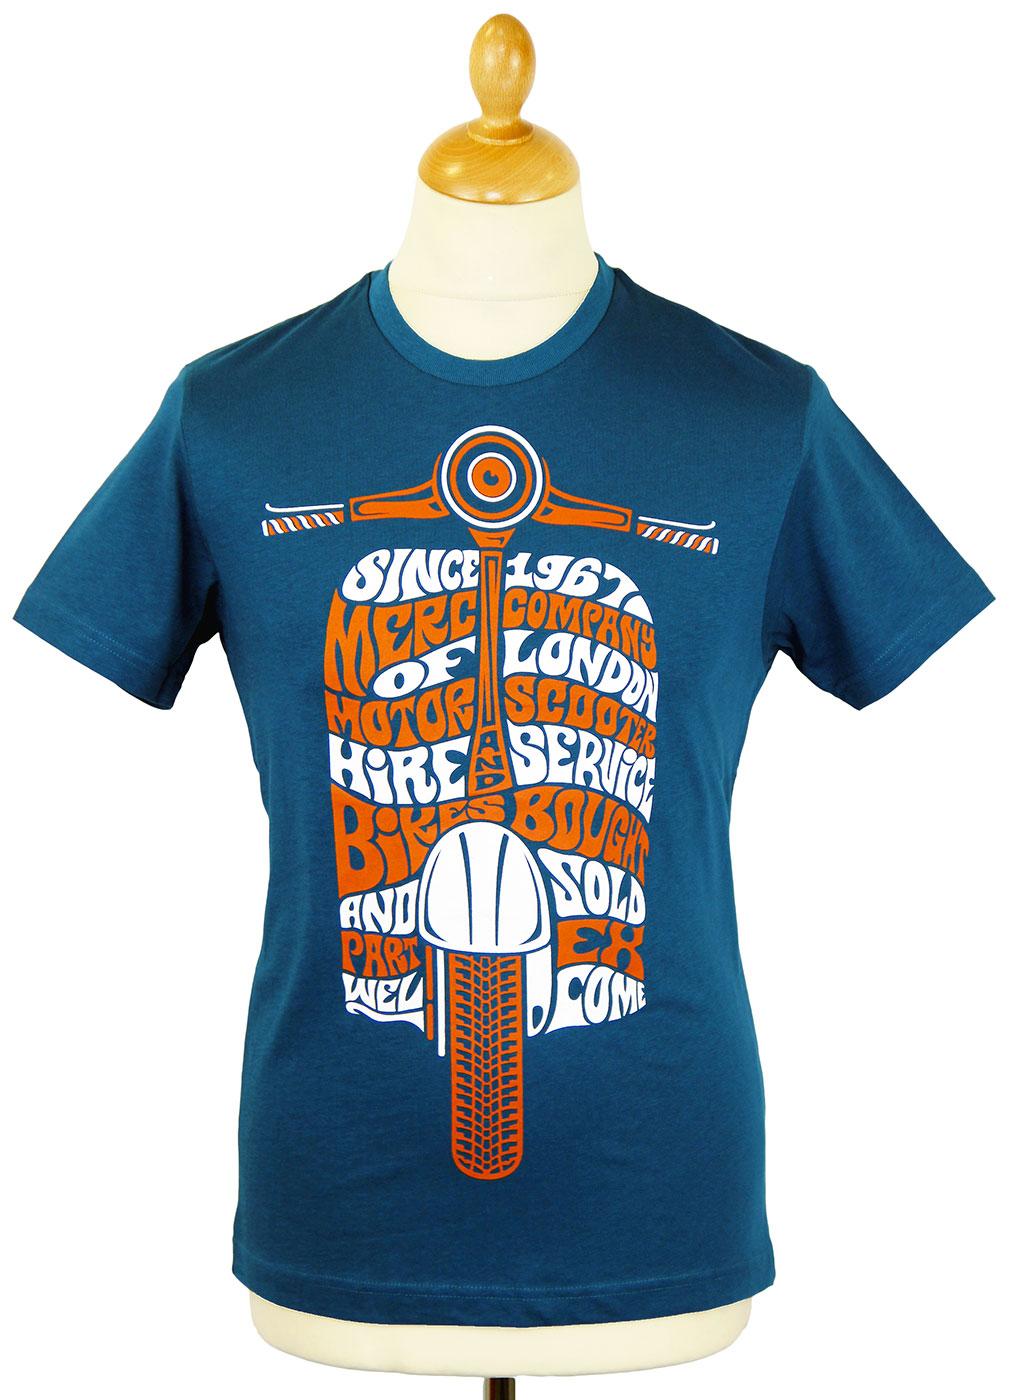 Ealing MERC Retro Mod Psychedelic Scooter Tee (BB)